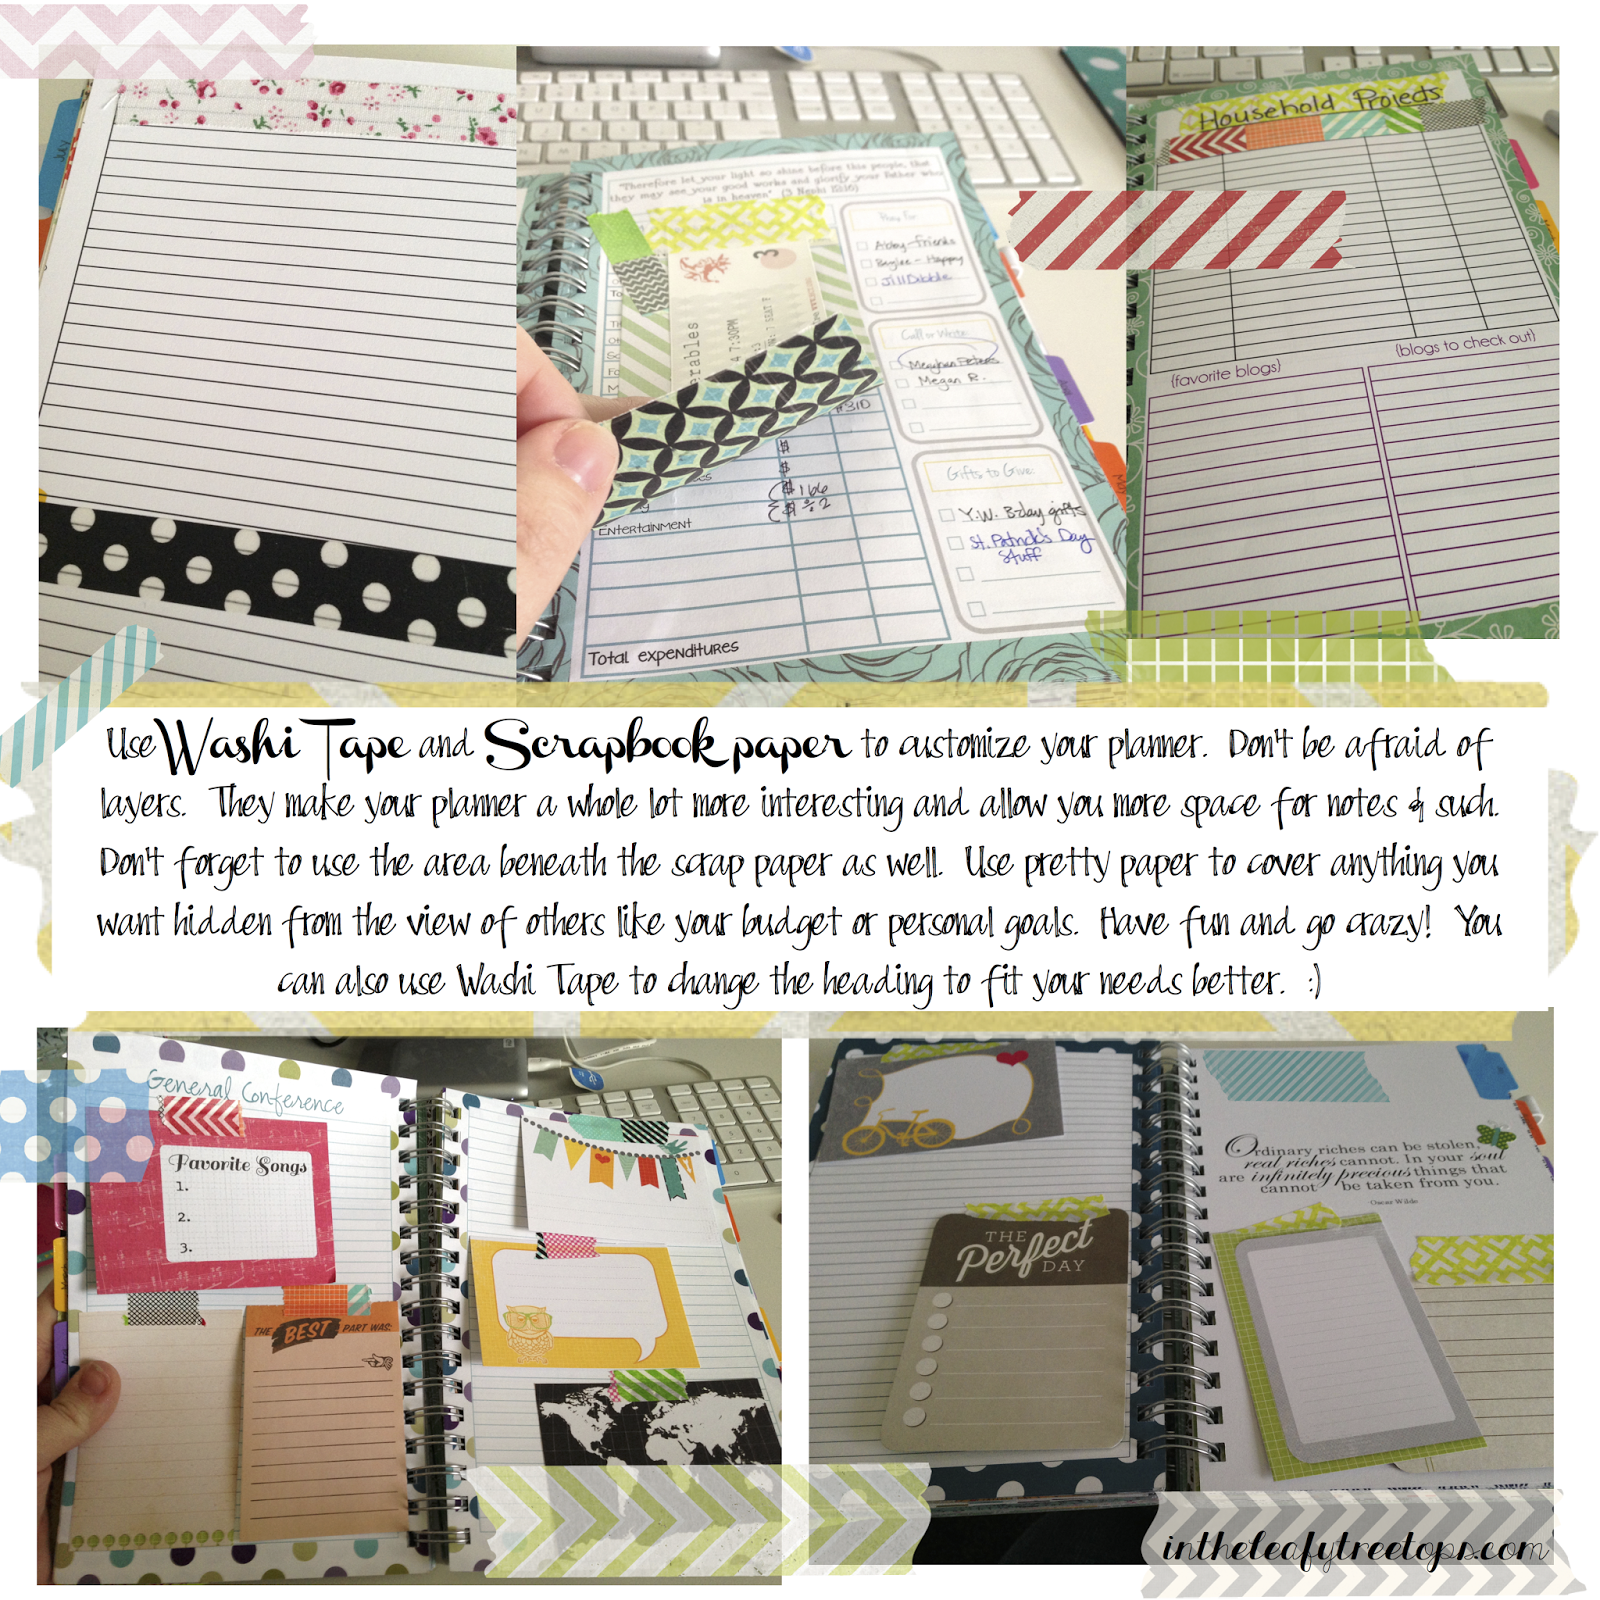 Mormon Mom Planners - Monthly Planner/Weekly Planner: Using Washi Tape &  Scrapbook Paper to utilize your planner